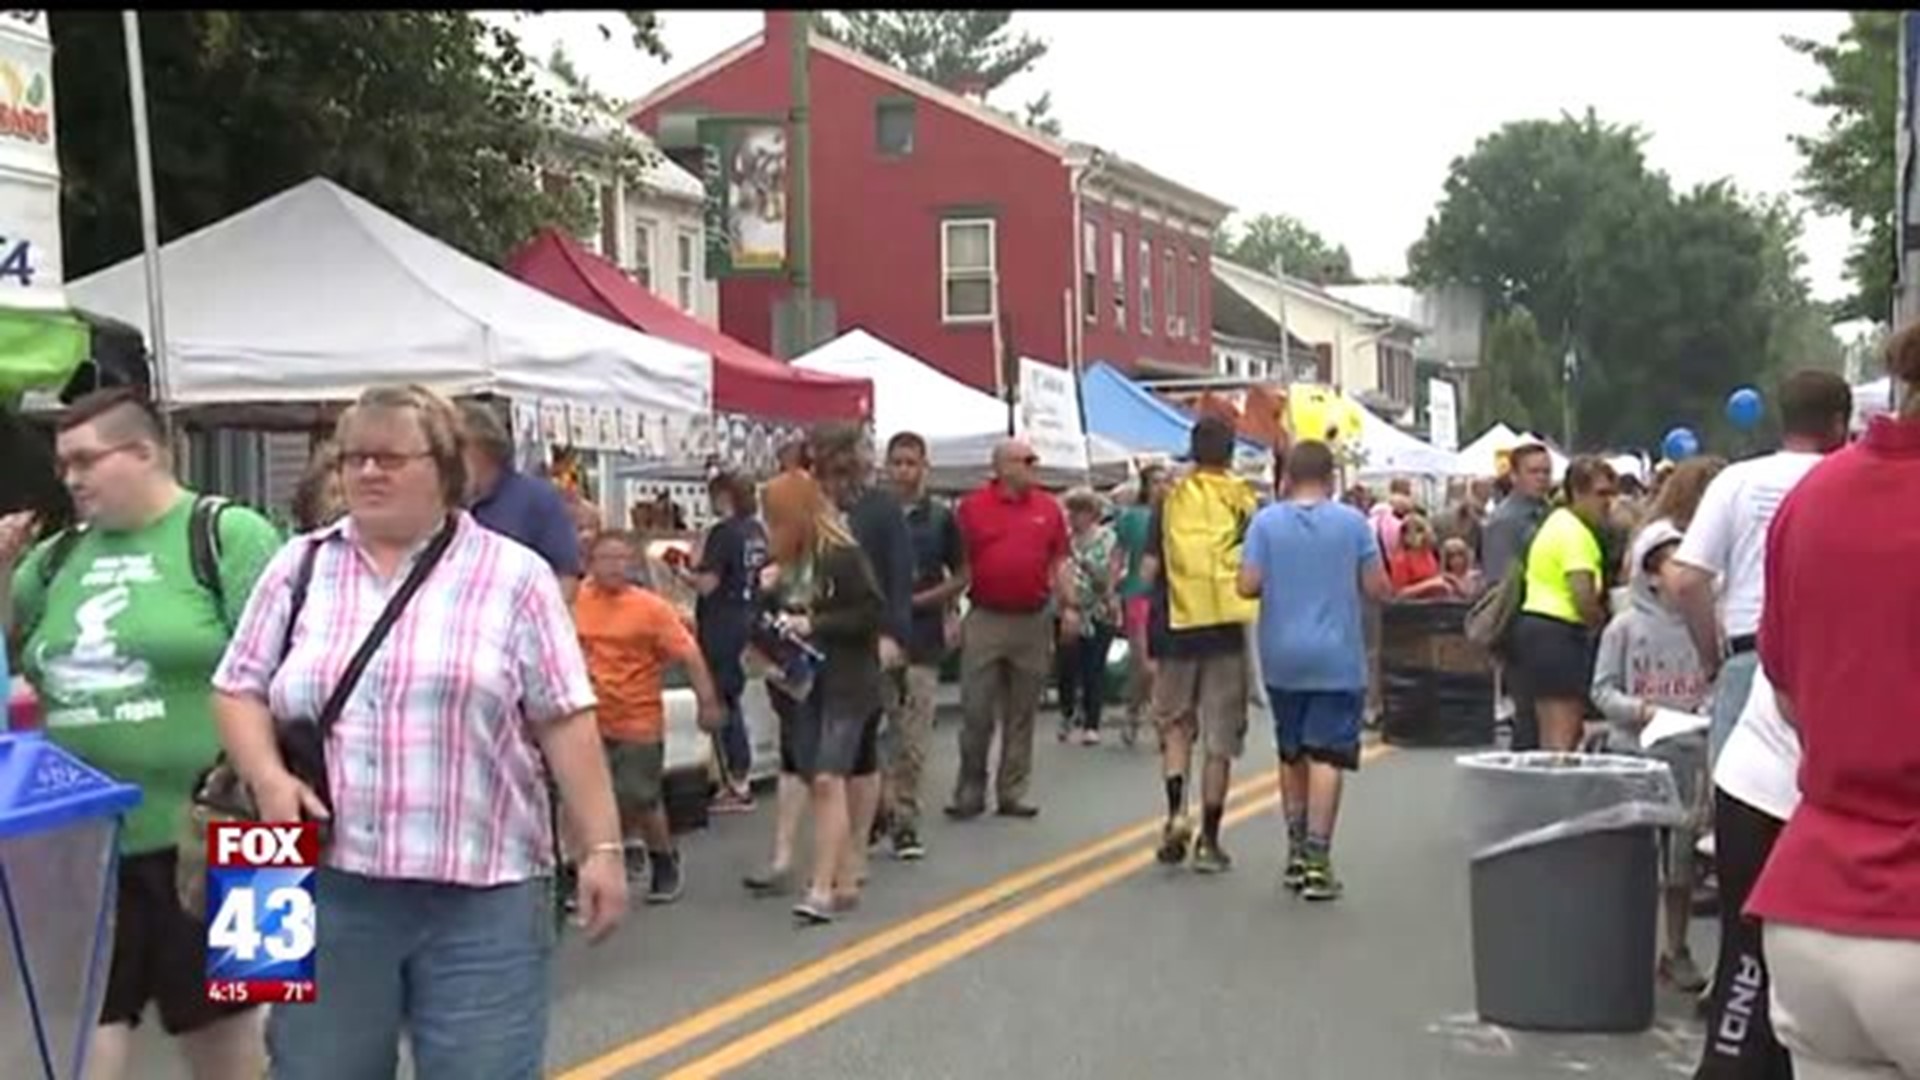 Thousands of people attend Jubilee Day in Mechanicsburg